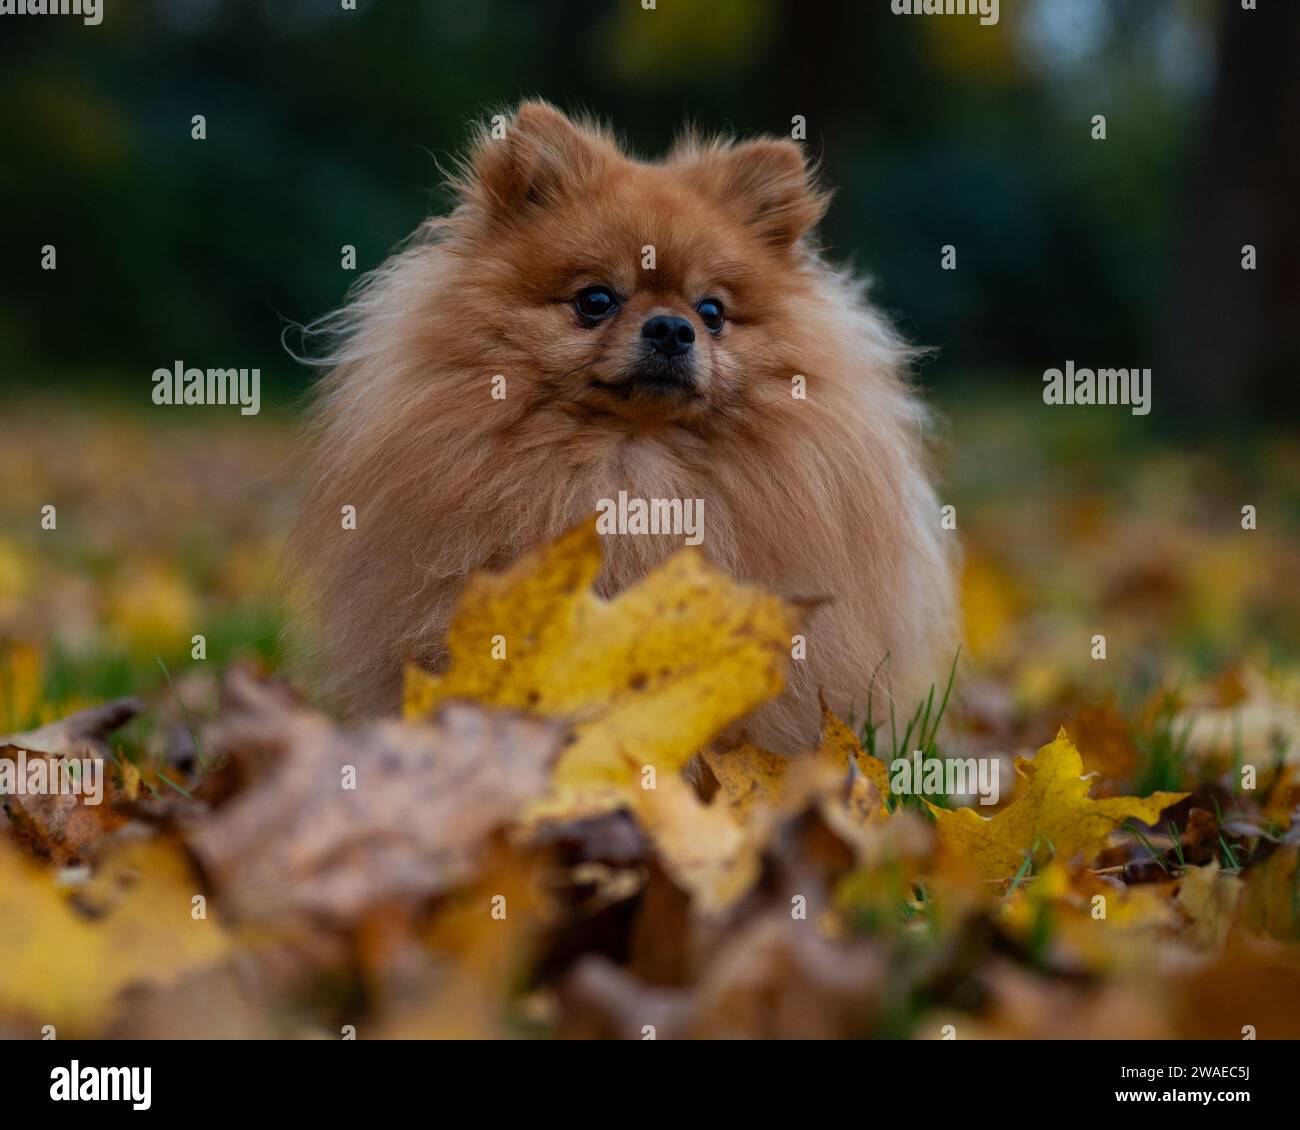 An adorable pomeranian dog with long fur sitting outdoors in a pile of autumn leaves Stock Photo